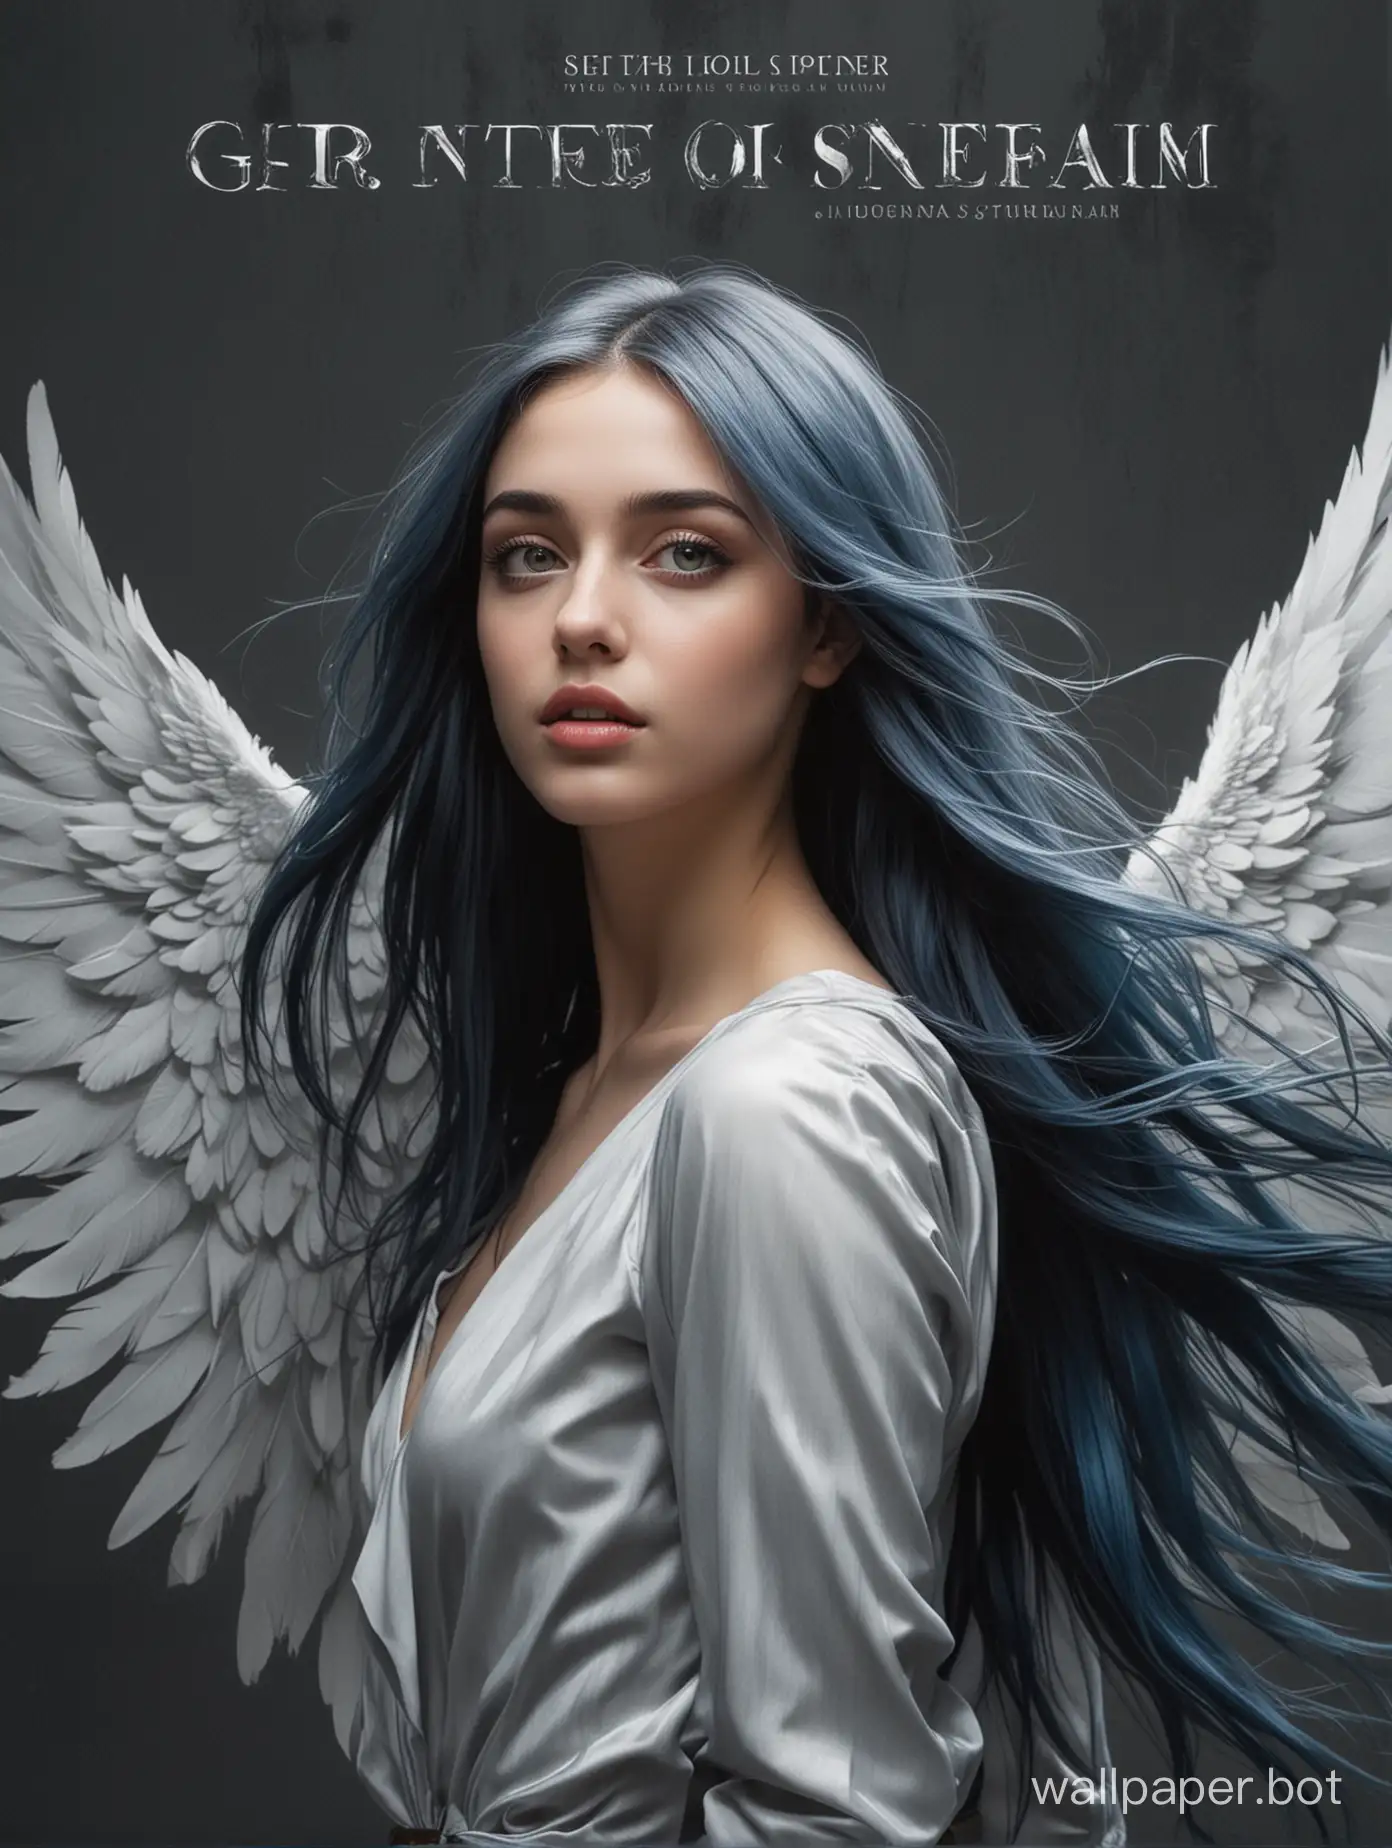 On the black-and-gray cover of the book is depicted a girl with long, straight, and vividly blackish-blue hair, falling freely onto her shoulders and back. Her gray eyes are filled with a melancholic and mysterious gaze that mesmerizes the viewer. The light skin of the girl stands out against the dark background, creating contrast and adding dynamism to the composition. Behind her stands a young man without a beard, dressed in a formal suit. His gaze is directed at the girl, but it remains unnoticed, emphasizing her role as the central character of the cover. Wings and feathers flutter around the girl, creating a sense of movement and adding dynamism to the cover. This effect is enhanced by dark and silvery shades that shimmer on the surface of the cover, creating depth and visual interest.